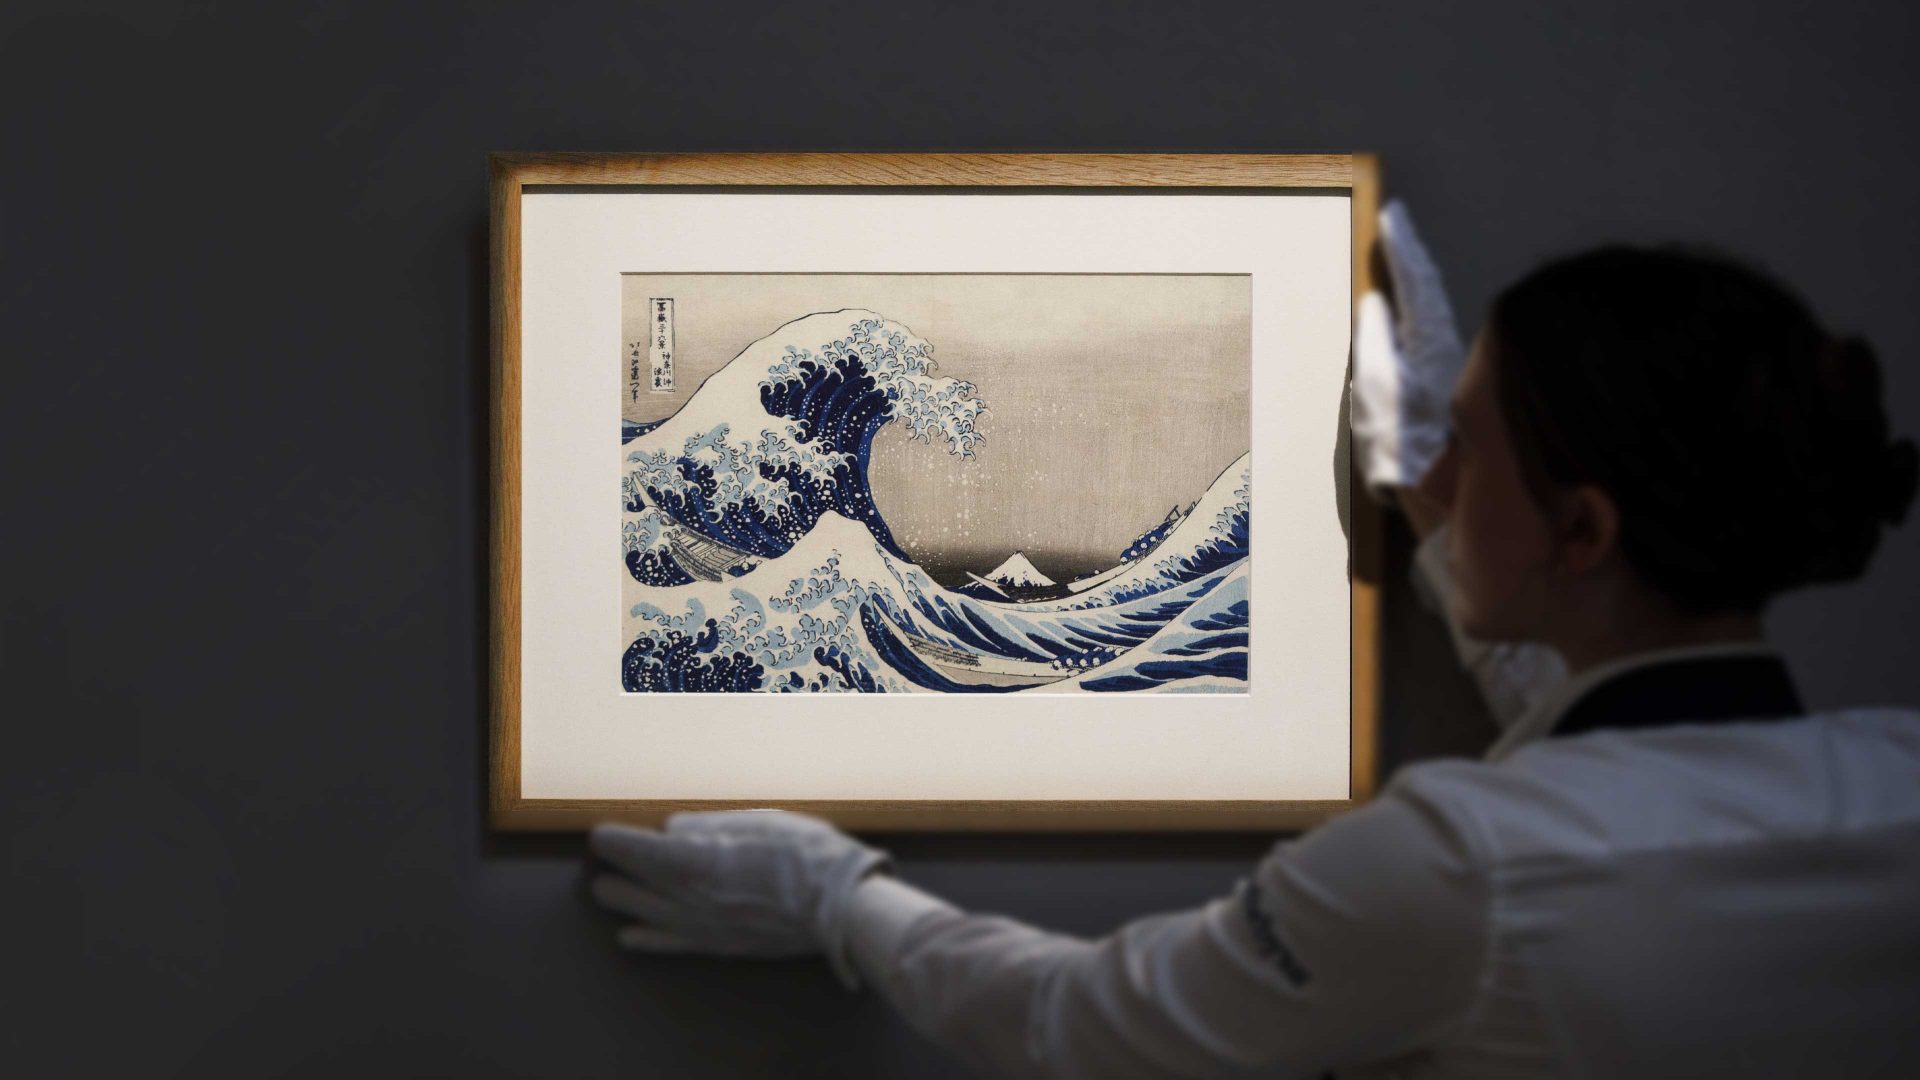 Multicultural Man: On Hokusai - The New European